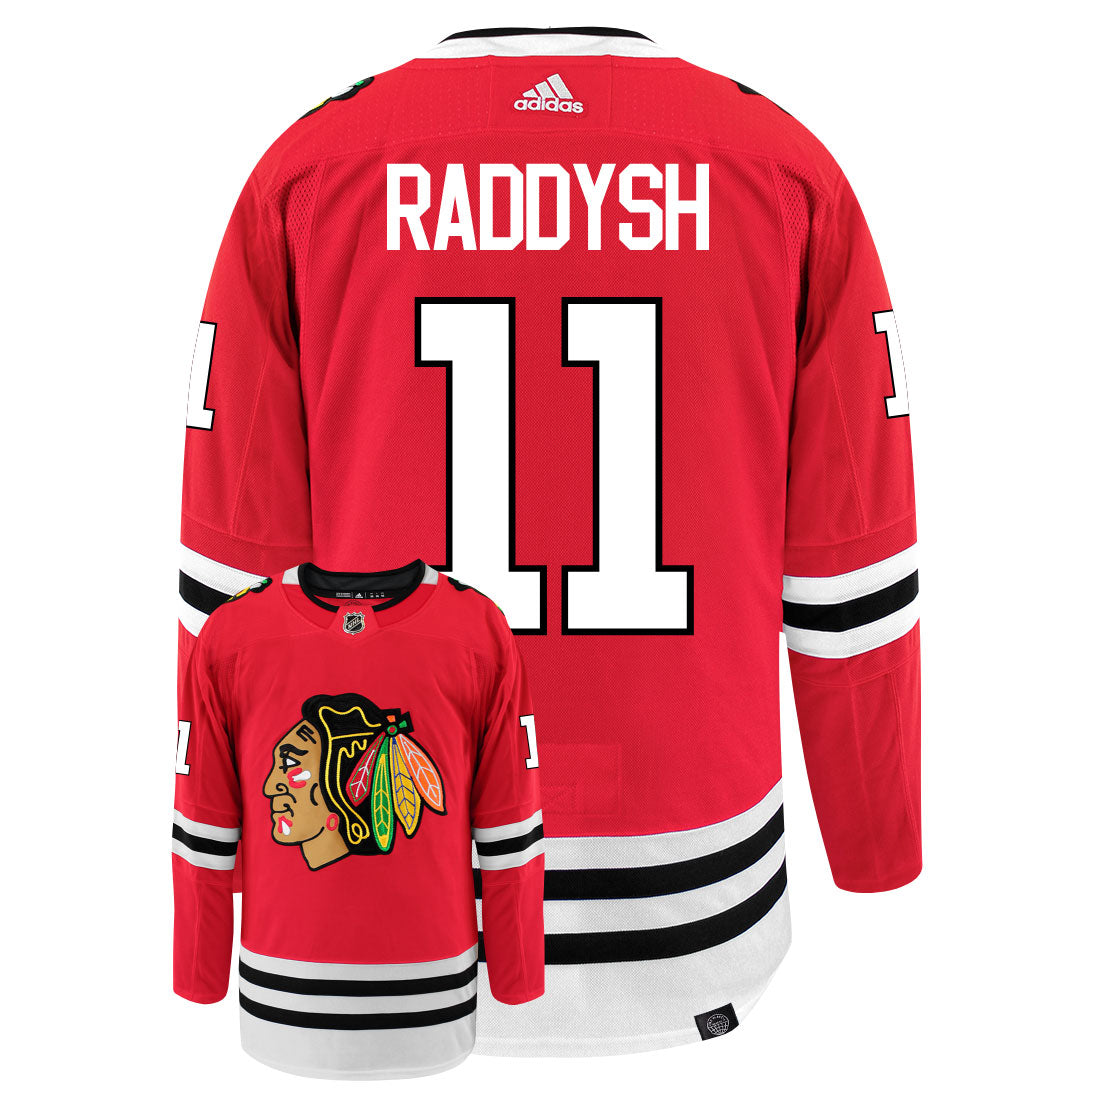 Taylor Raddysh Chicago Blackhawks Adidas Primegreen Authentic Home NHL Hockey Jersey - Back/Front View